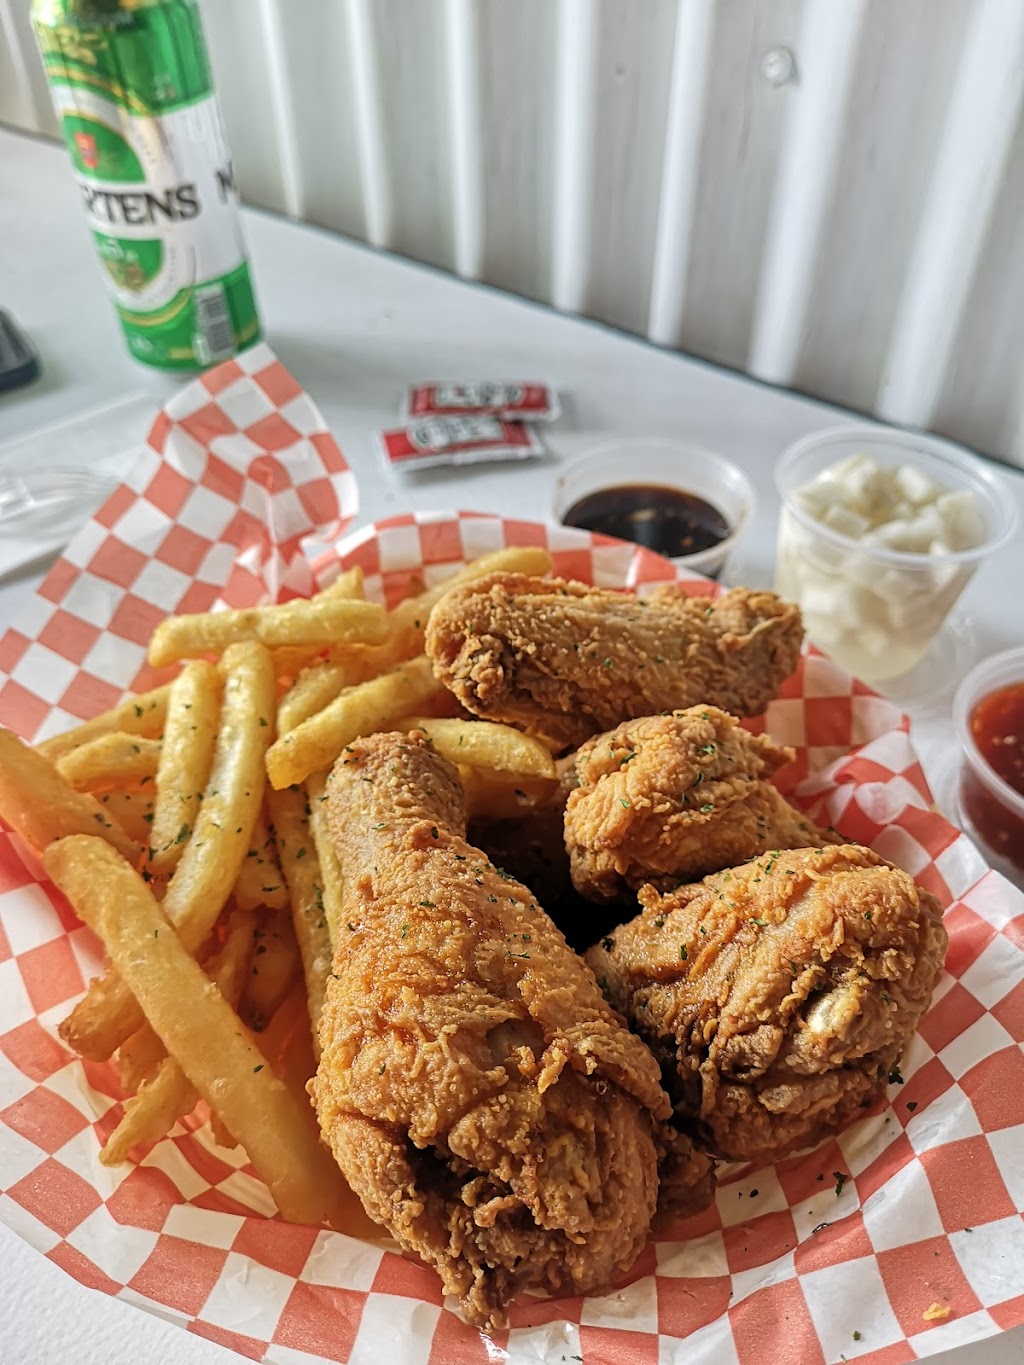 Les Crazy Chickens | meal takeaway | 3532 Rue Notre Dame O, Montréal, QC H4C 1P4, Canada | 5148003019 OR +1 514-800-3019